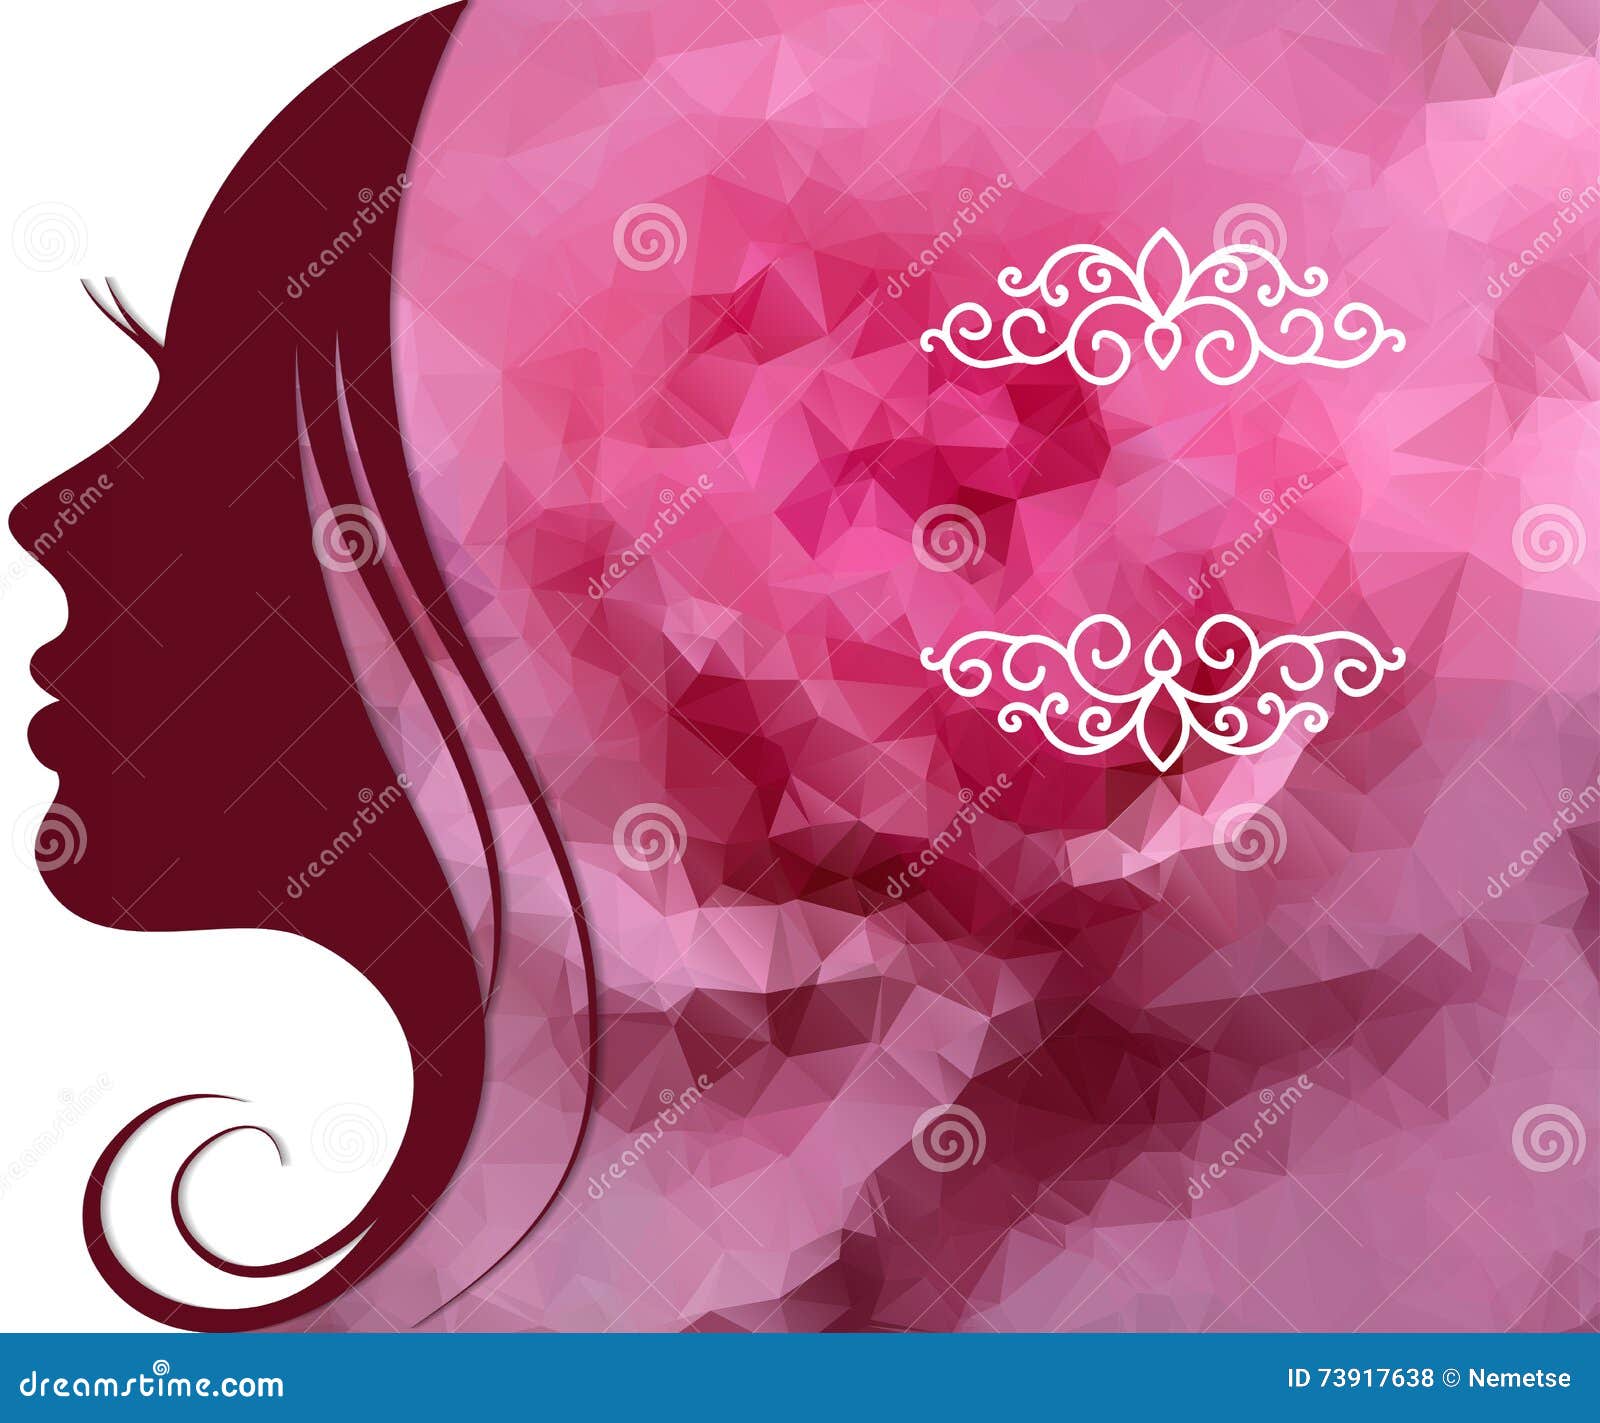 Template Layout with Beautiful Female Profile Stock Vector ...